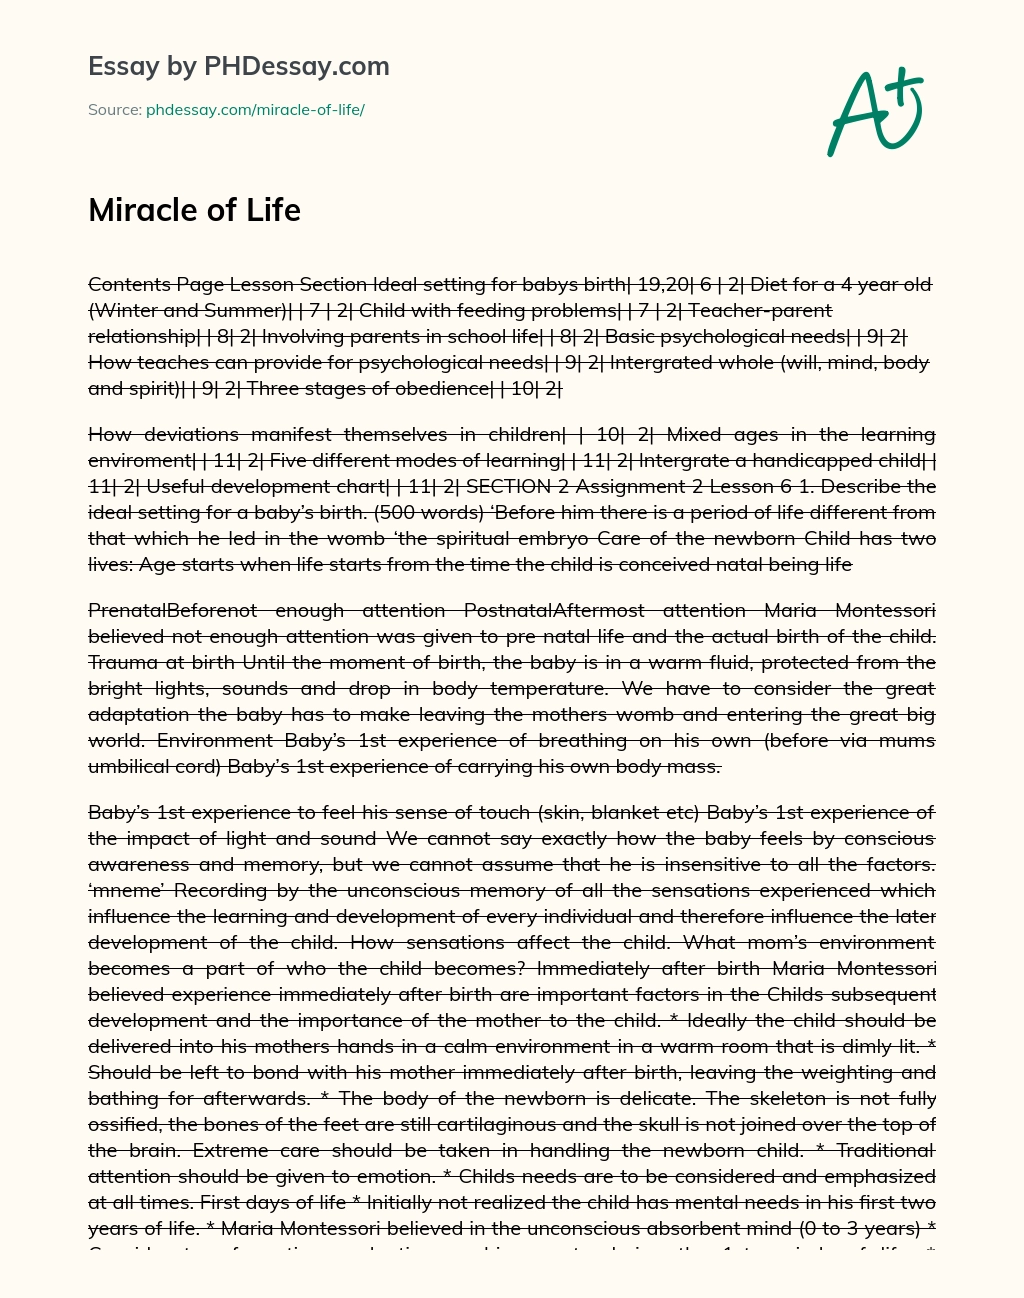 Miracle of Life essay